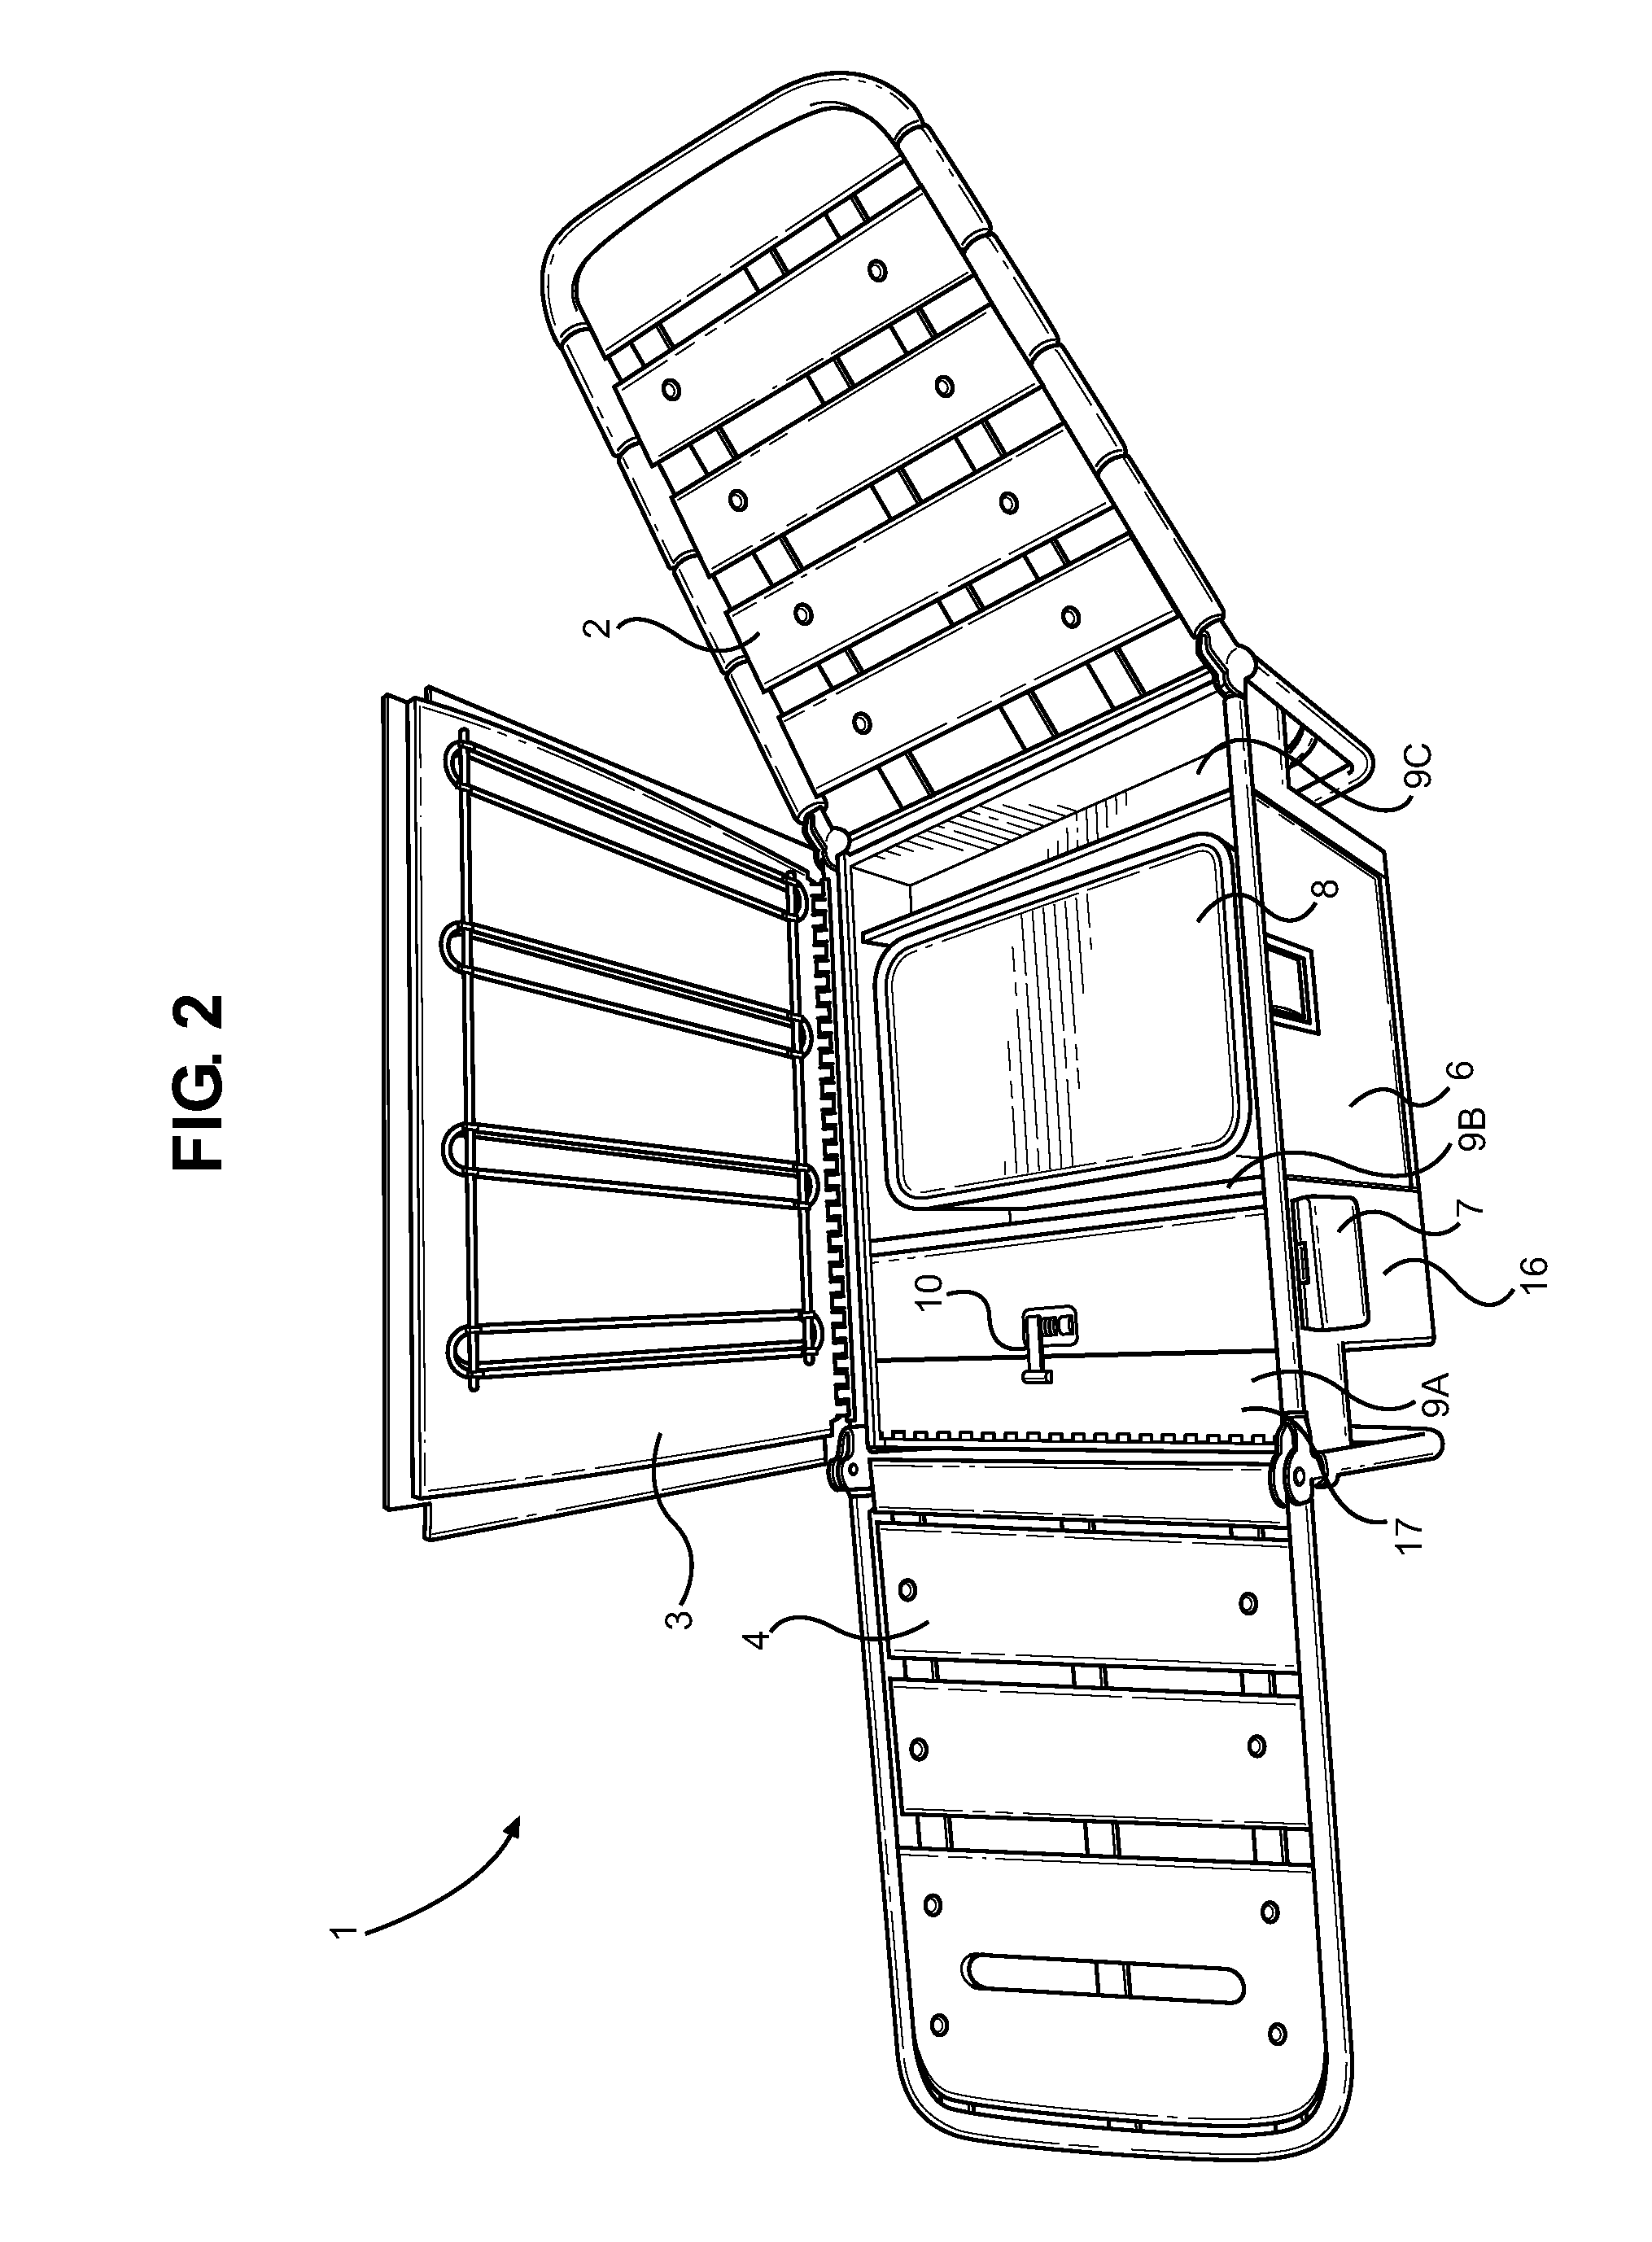 Foldable and portable lounge chair having an integrated lockable storage compartment